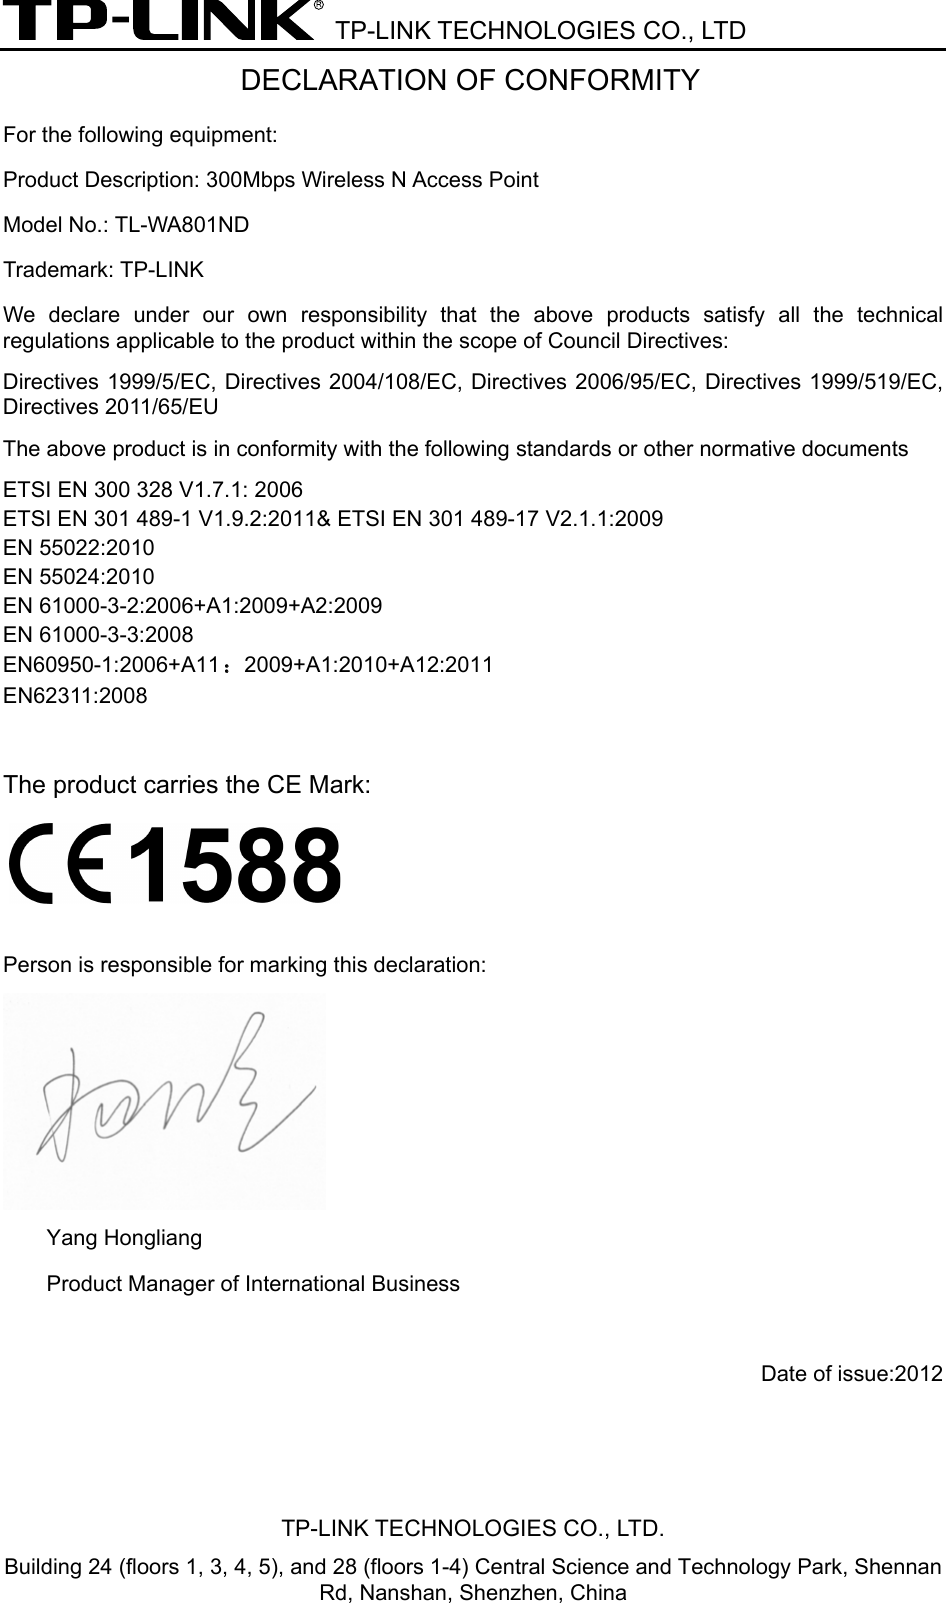  TP-LINK TECHNOLOGIES CO., LTD DECLARATION OF CONFORMITY For the following equipment: Product Description: 300Mbps Wireless N Access Point  Model No.: TL-WA801ND Trademark: TP-LINK We  declare under our own responsibility  that  the  above  products  satisfy  all  the  technical regulations applicable to the product within the scope of Council Directives:     Directives 1999/5/EC, Directives 2004/108/EC, Directives 2006/95/EC, Directives 1999/519/EC, Directives 2011/65/EU The above product is in conformity with the following standards or other normative documents ETSI EN 300 328 V1.7.1: 2006 ETSI EN 301 489-1 V1.9.2:2011&amp; ETSI EN 301 489-17 V2.1.1:2009 EN 55022:2010 EN 55024:2010 EN 61000-3-2:2006+A1:2009+A2:2009 EN 61000-3-3:2008 EN60950-1:2006+A11：2009+A1:2010+A12:2011 EN62311:2008  The product carries the CE Mark:   Person is responsible for marking this declaration:  Yang Hongliang Product Manager of International Business     Date of issue:2012 TP-LINK TECHNOLOGIES CO., LTD. Building 24 (floors 1, 3, 4, 5), and 28 (floors 1-4) Central Science and Technology Park, Shennan Rd, Nanshan, Shenzhen, China 